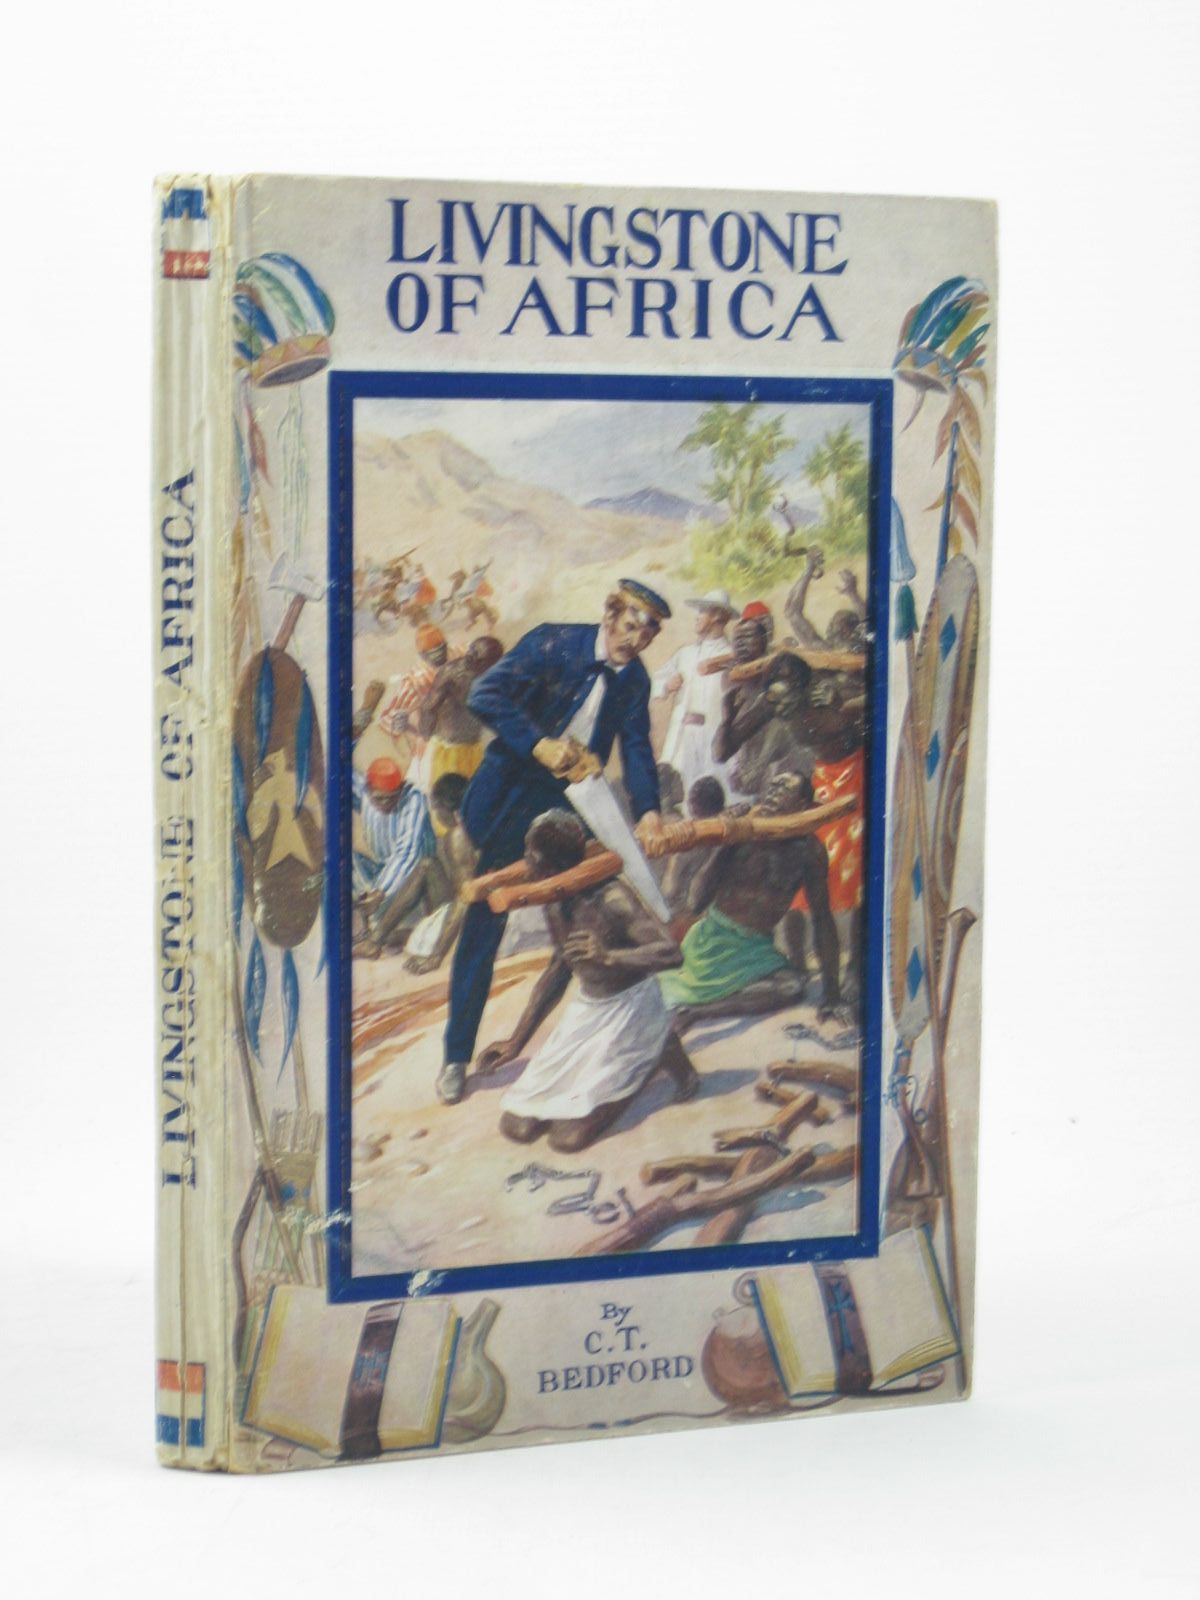 Photo of LIVINGSTONE OF AFRICA written by Bedford, C.T. illustrated by Ogle, published by Seeley, Service &amp; Co. Ltd. (STOCK CODE: 1312411)  for sale by Stella & Rose's Books